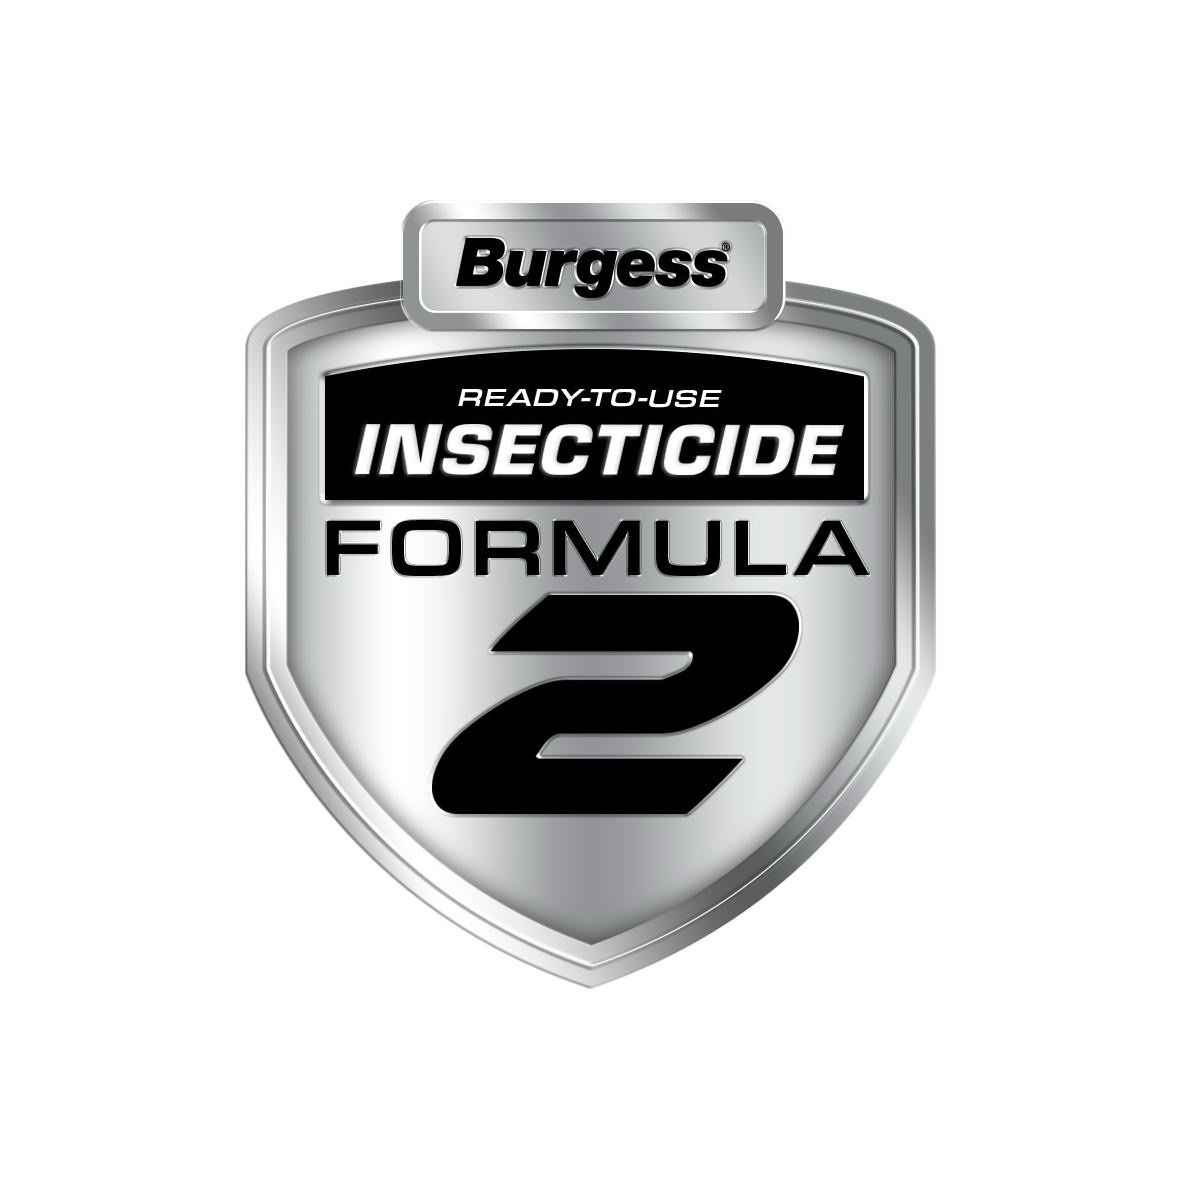  BURGESS READY-TO-USE INSECTICIDE FORMULA 2